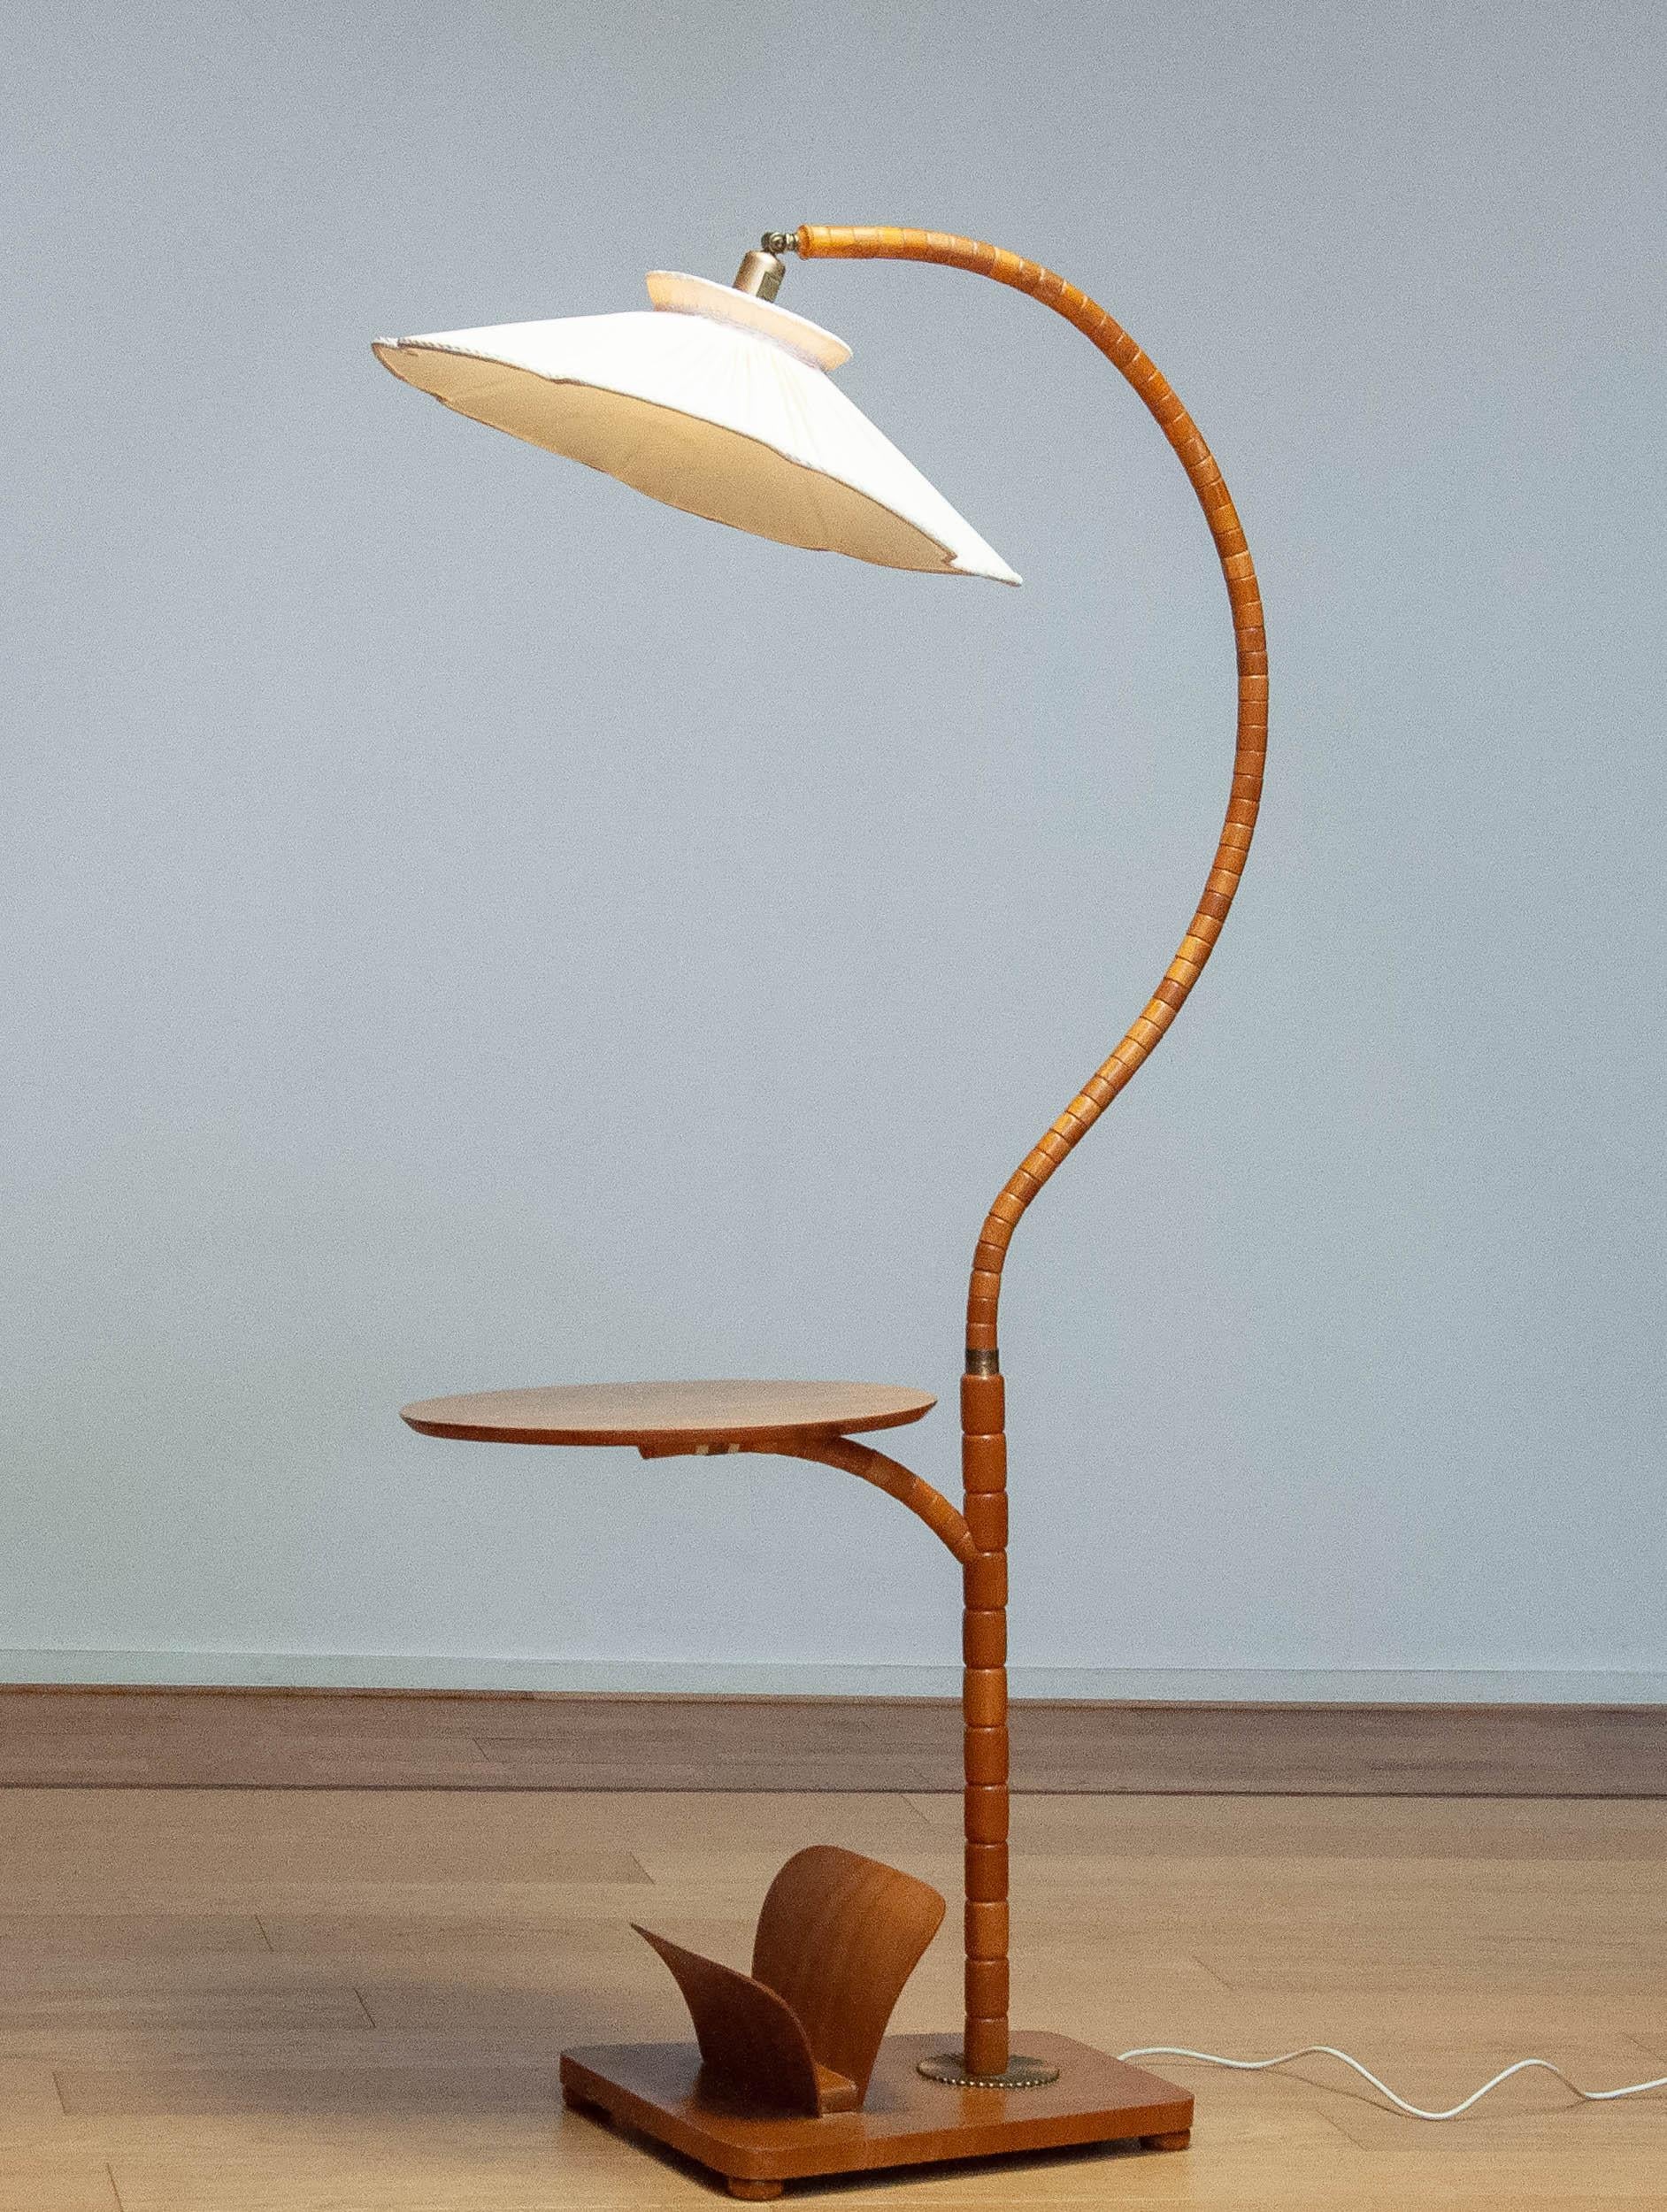 Absolutely beautiful and very rare Art Nouveau floor lamp made in the 1940s in Sweden by IWO in Mariestad.
The lamp is made of Elm wood combined with a table and magazine rack also in Elm. Table top is veneered in Elm and in good condition.